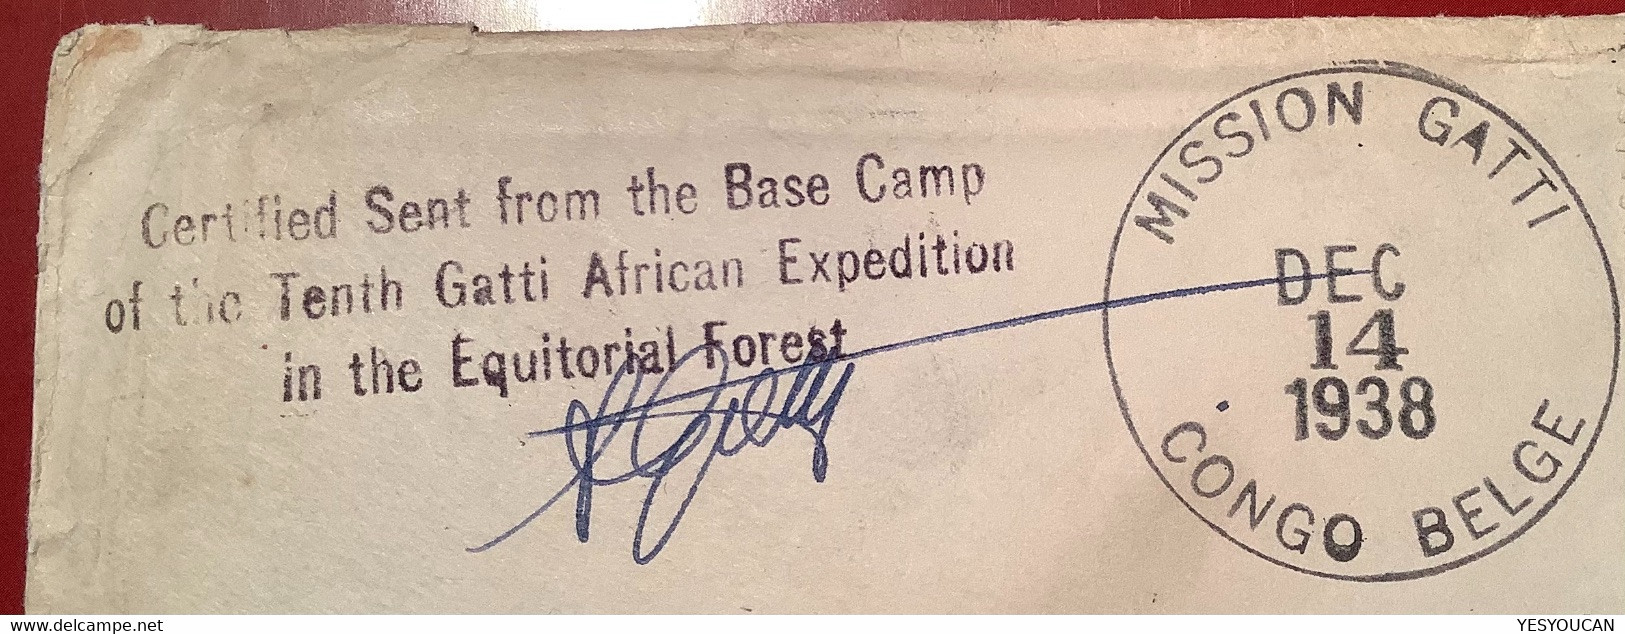 MISSION GATTI CONGO BELGE 1938 Cover>CANADA RRR ! STANLEYVILLE+BASE CAMP10th AFRICAN EXPEDITION EQUATORIAL FOREST(lettre - Covers & Documents